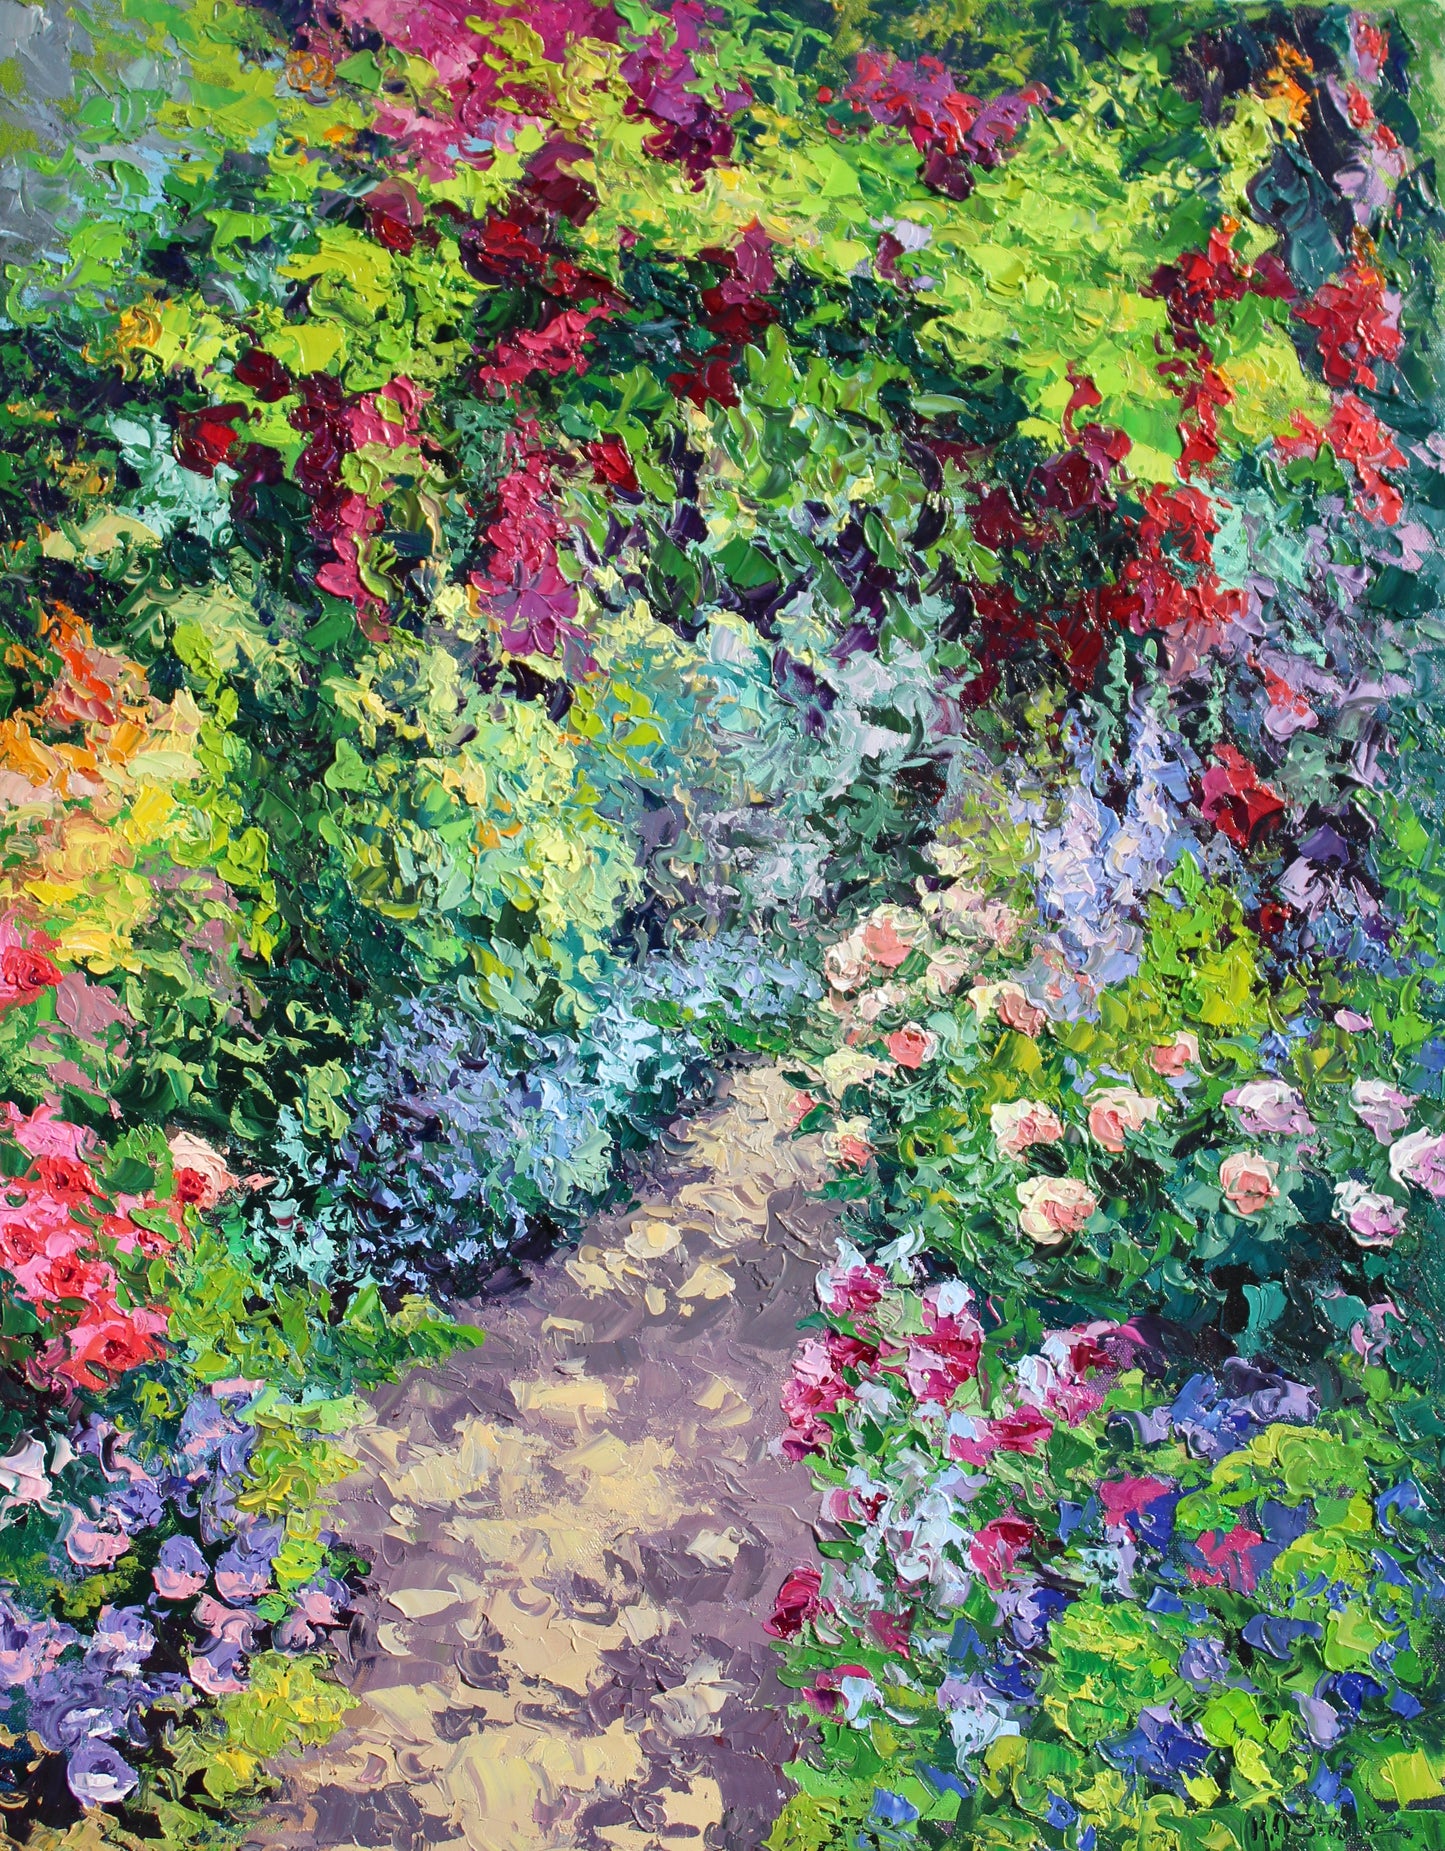 textured original oil painting with bright colors depicting a garden arch, roses, delphiniums and a garden path with light and shadow